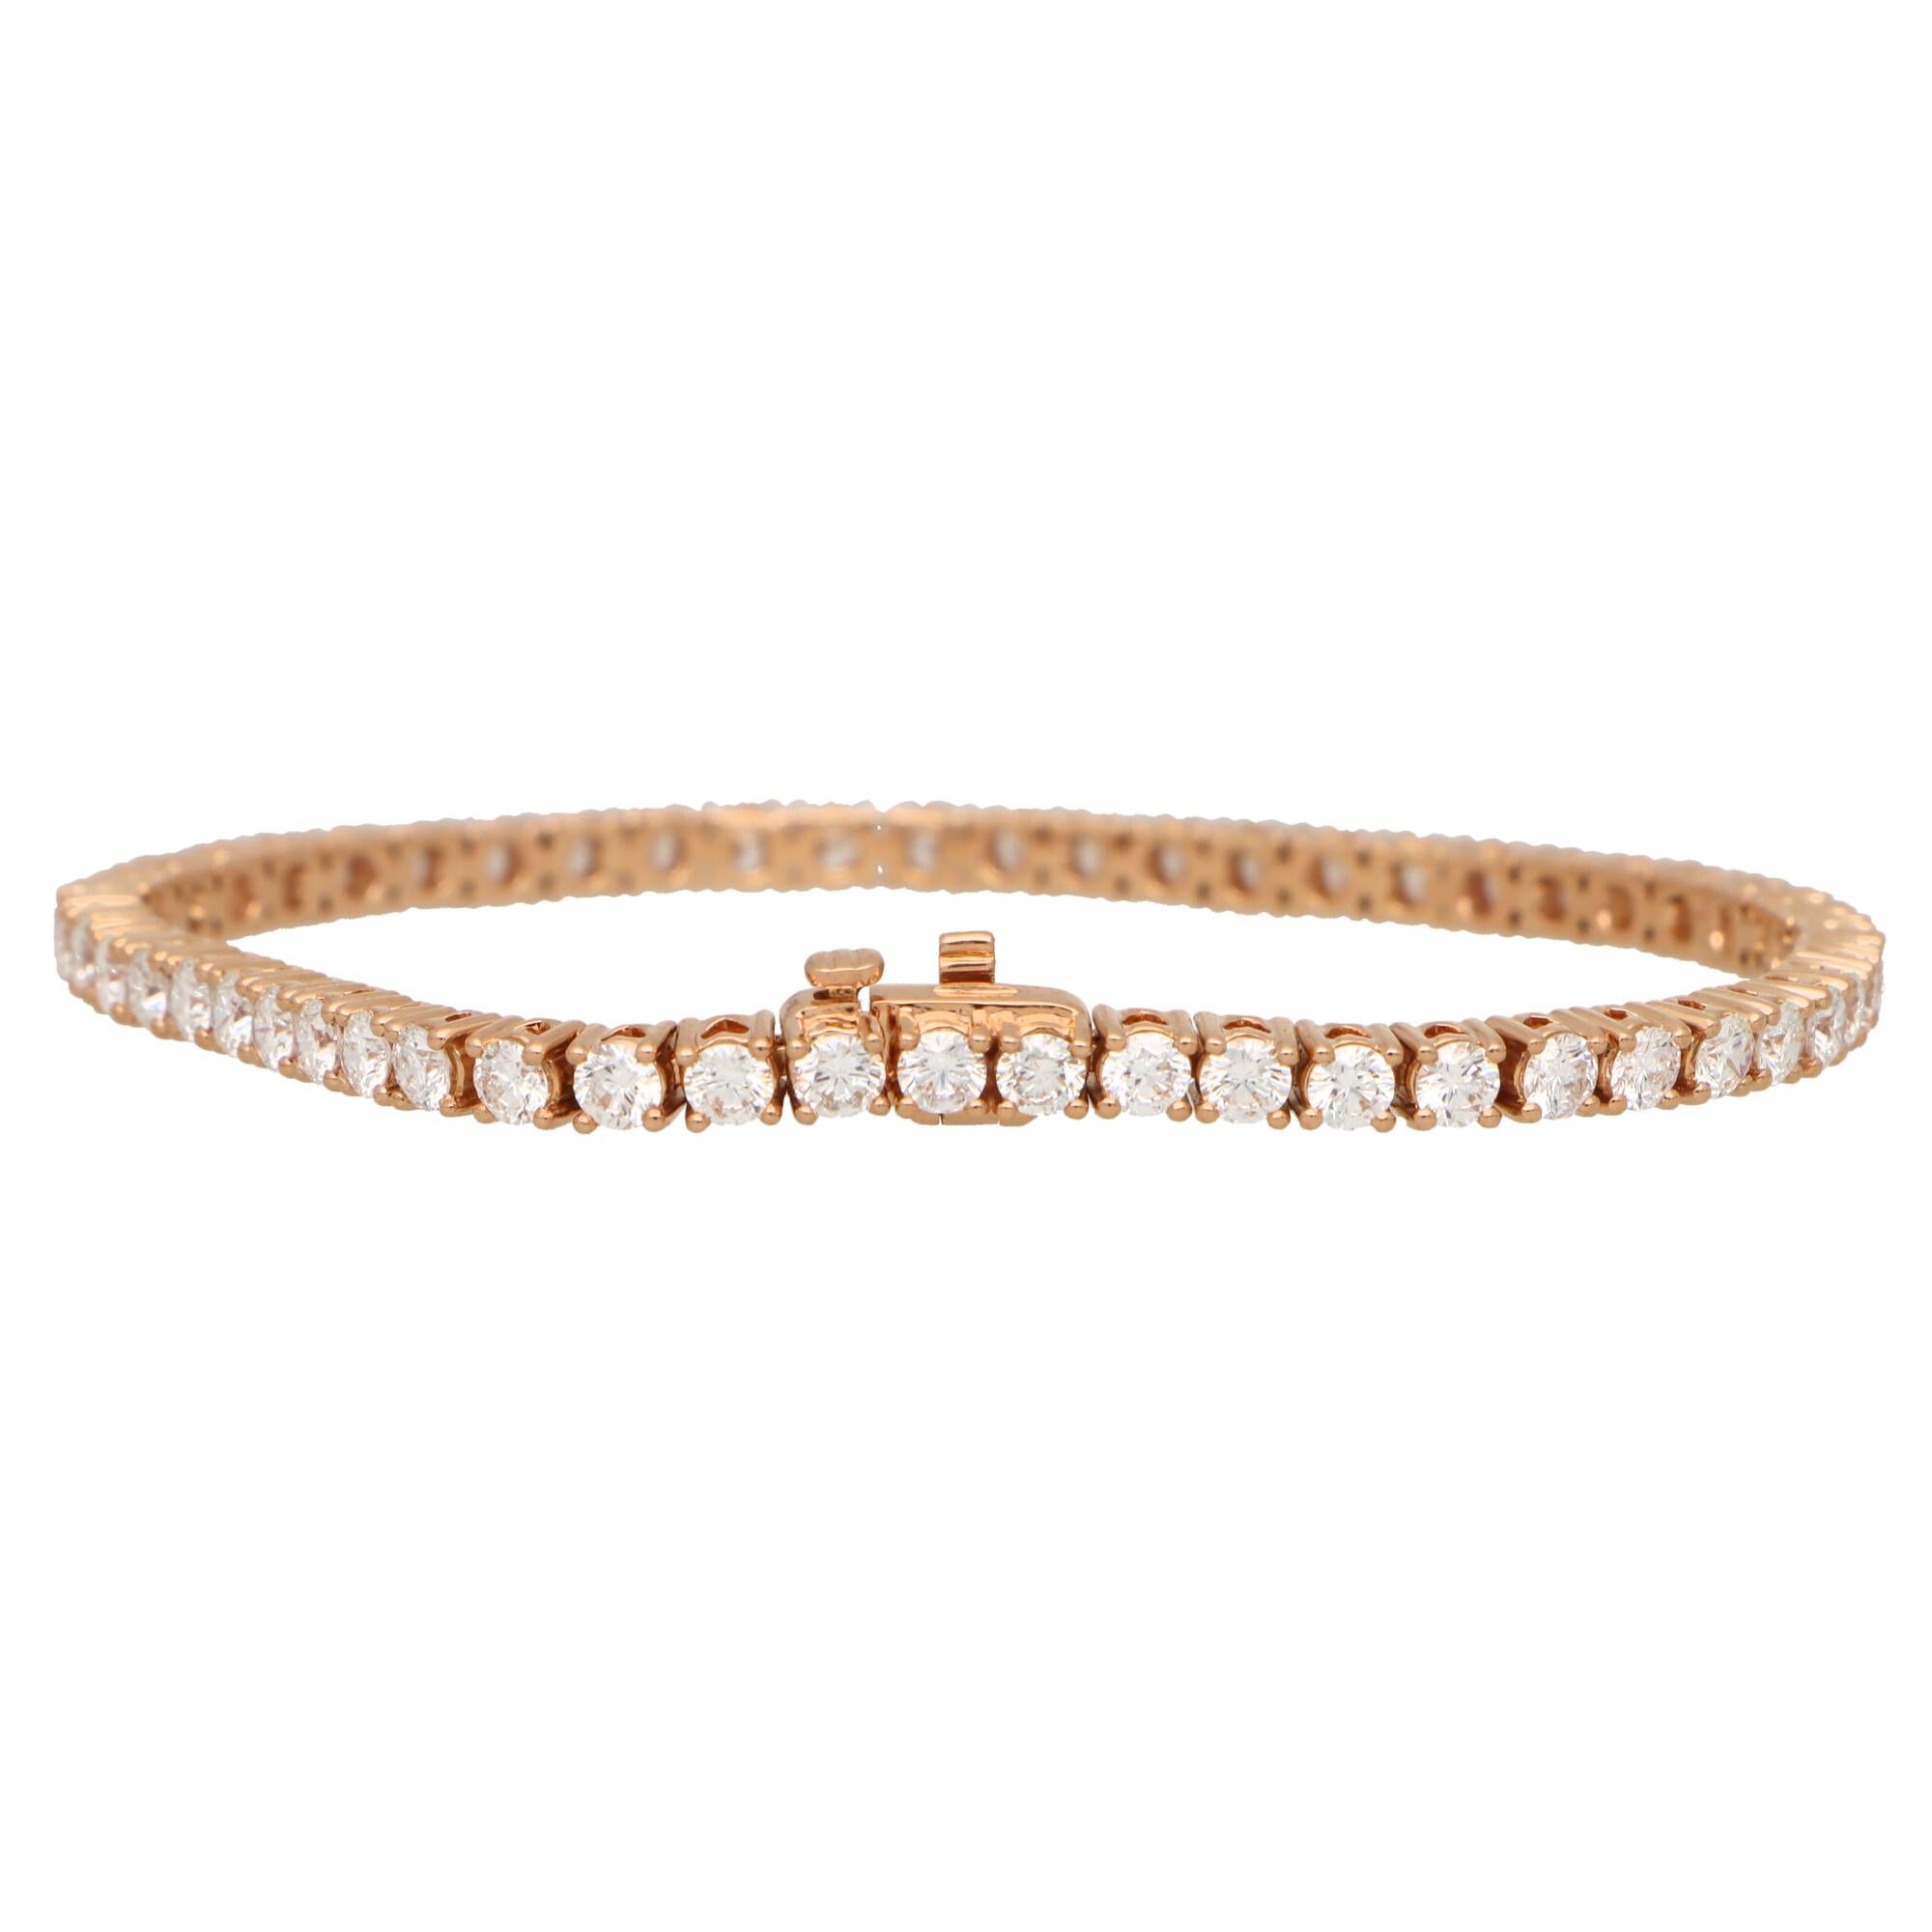 Contemporary 5.82ct Diamond Tennis Line Bracelet in 18k Rose Gold In Good Condition For Sale In London, GB